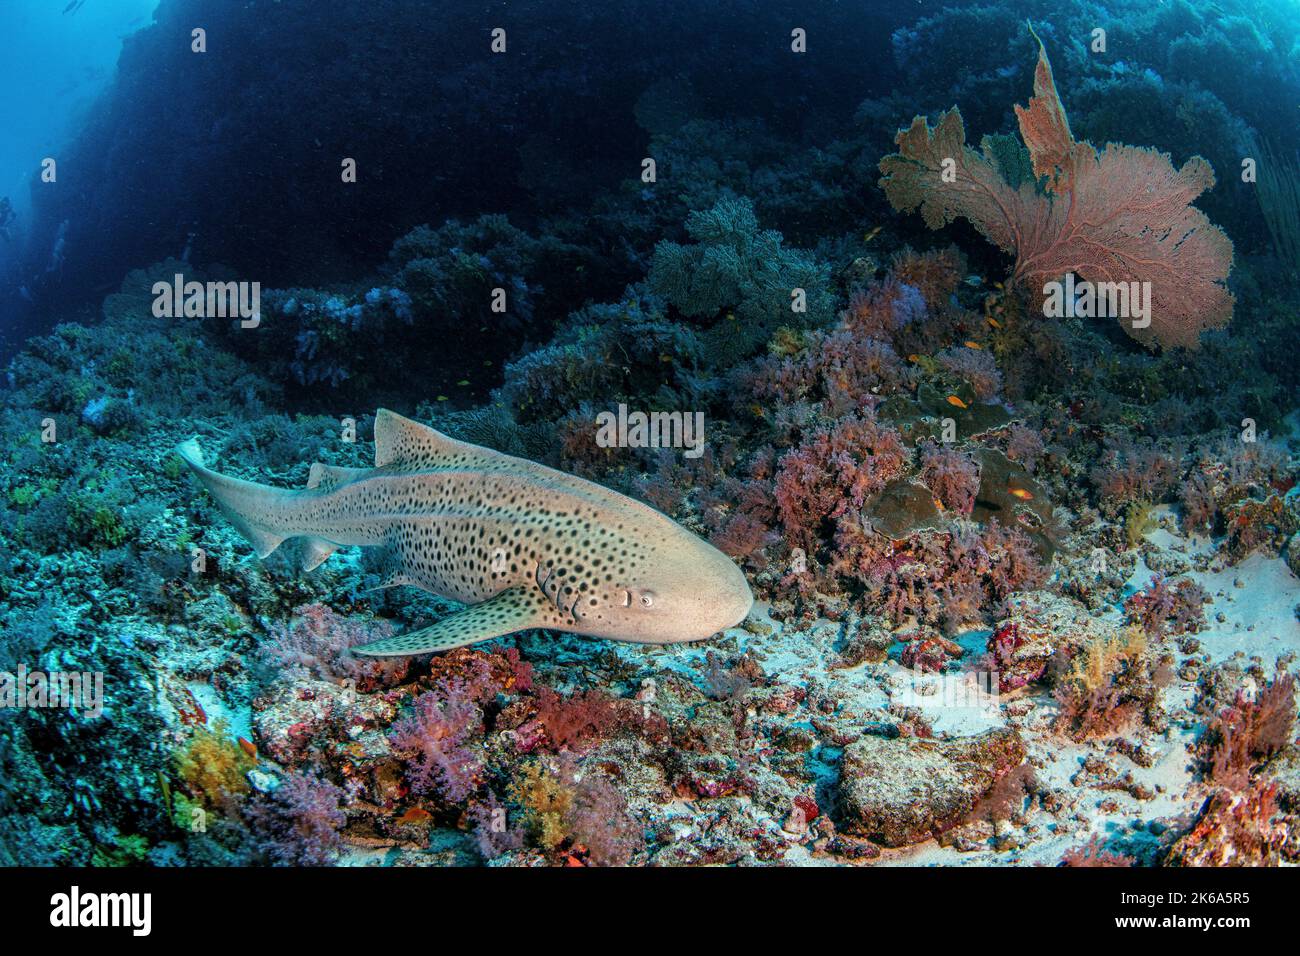 A leopard shark swims close to a coral reef, Maldives. Stock Photo